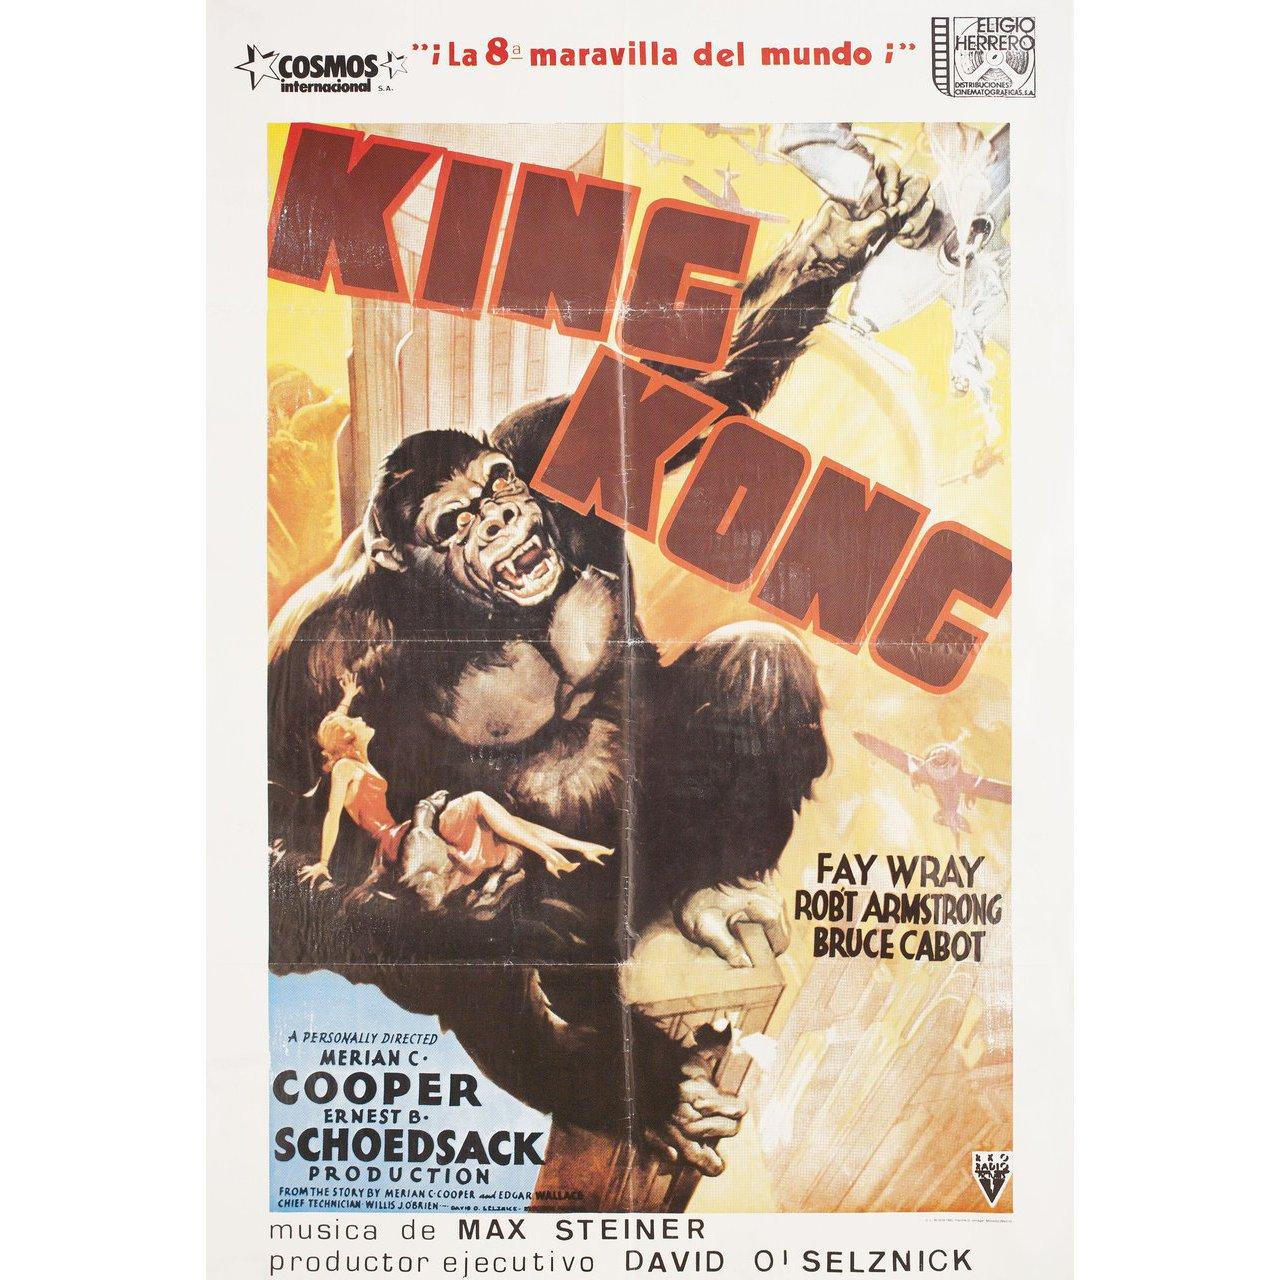 Original 1982 re-release Spanish B1 poster for the 1933 film King Kong directed by Merian C. Cooper / Ernest B. Schoedsack with Fay Wray / Robert Armstrong / Bruce Cabot / Frank Reicher. Very Good-Fine condition, folded. Many original posters were